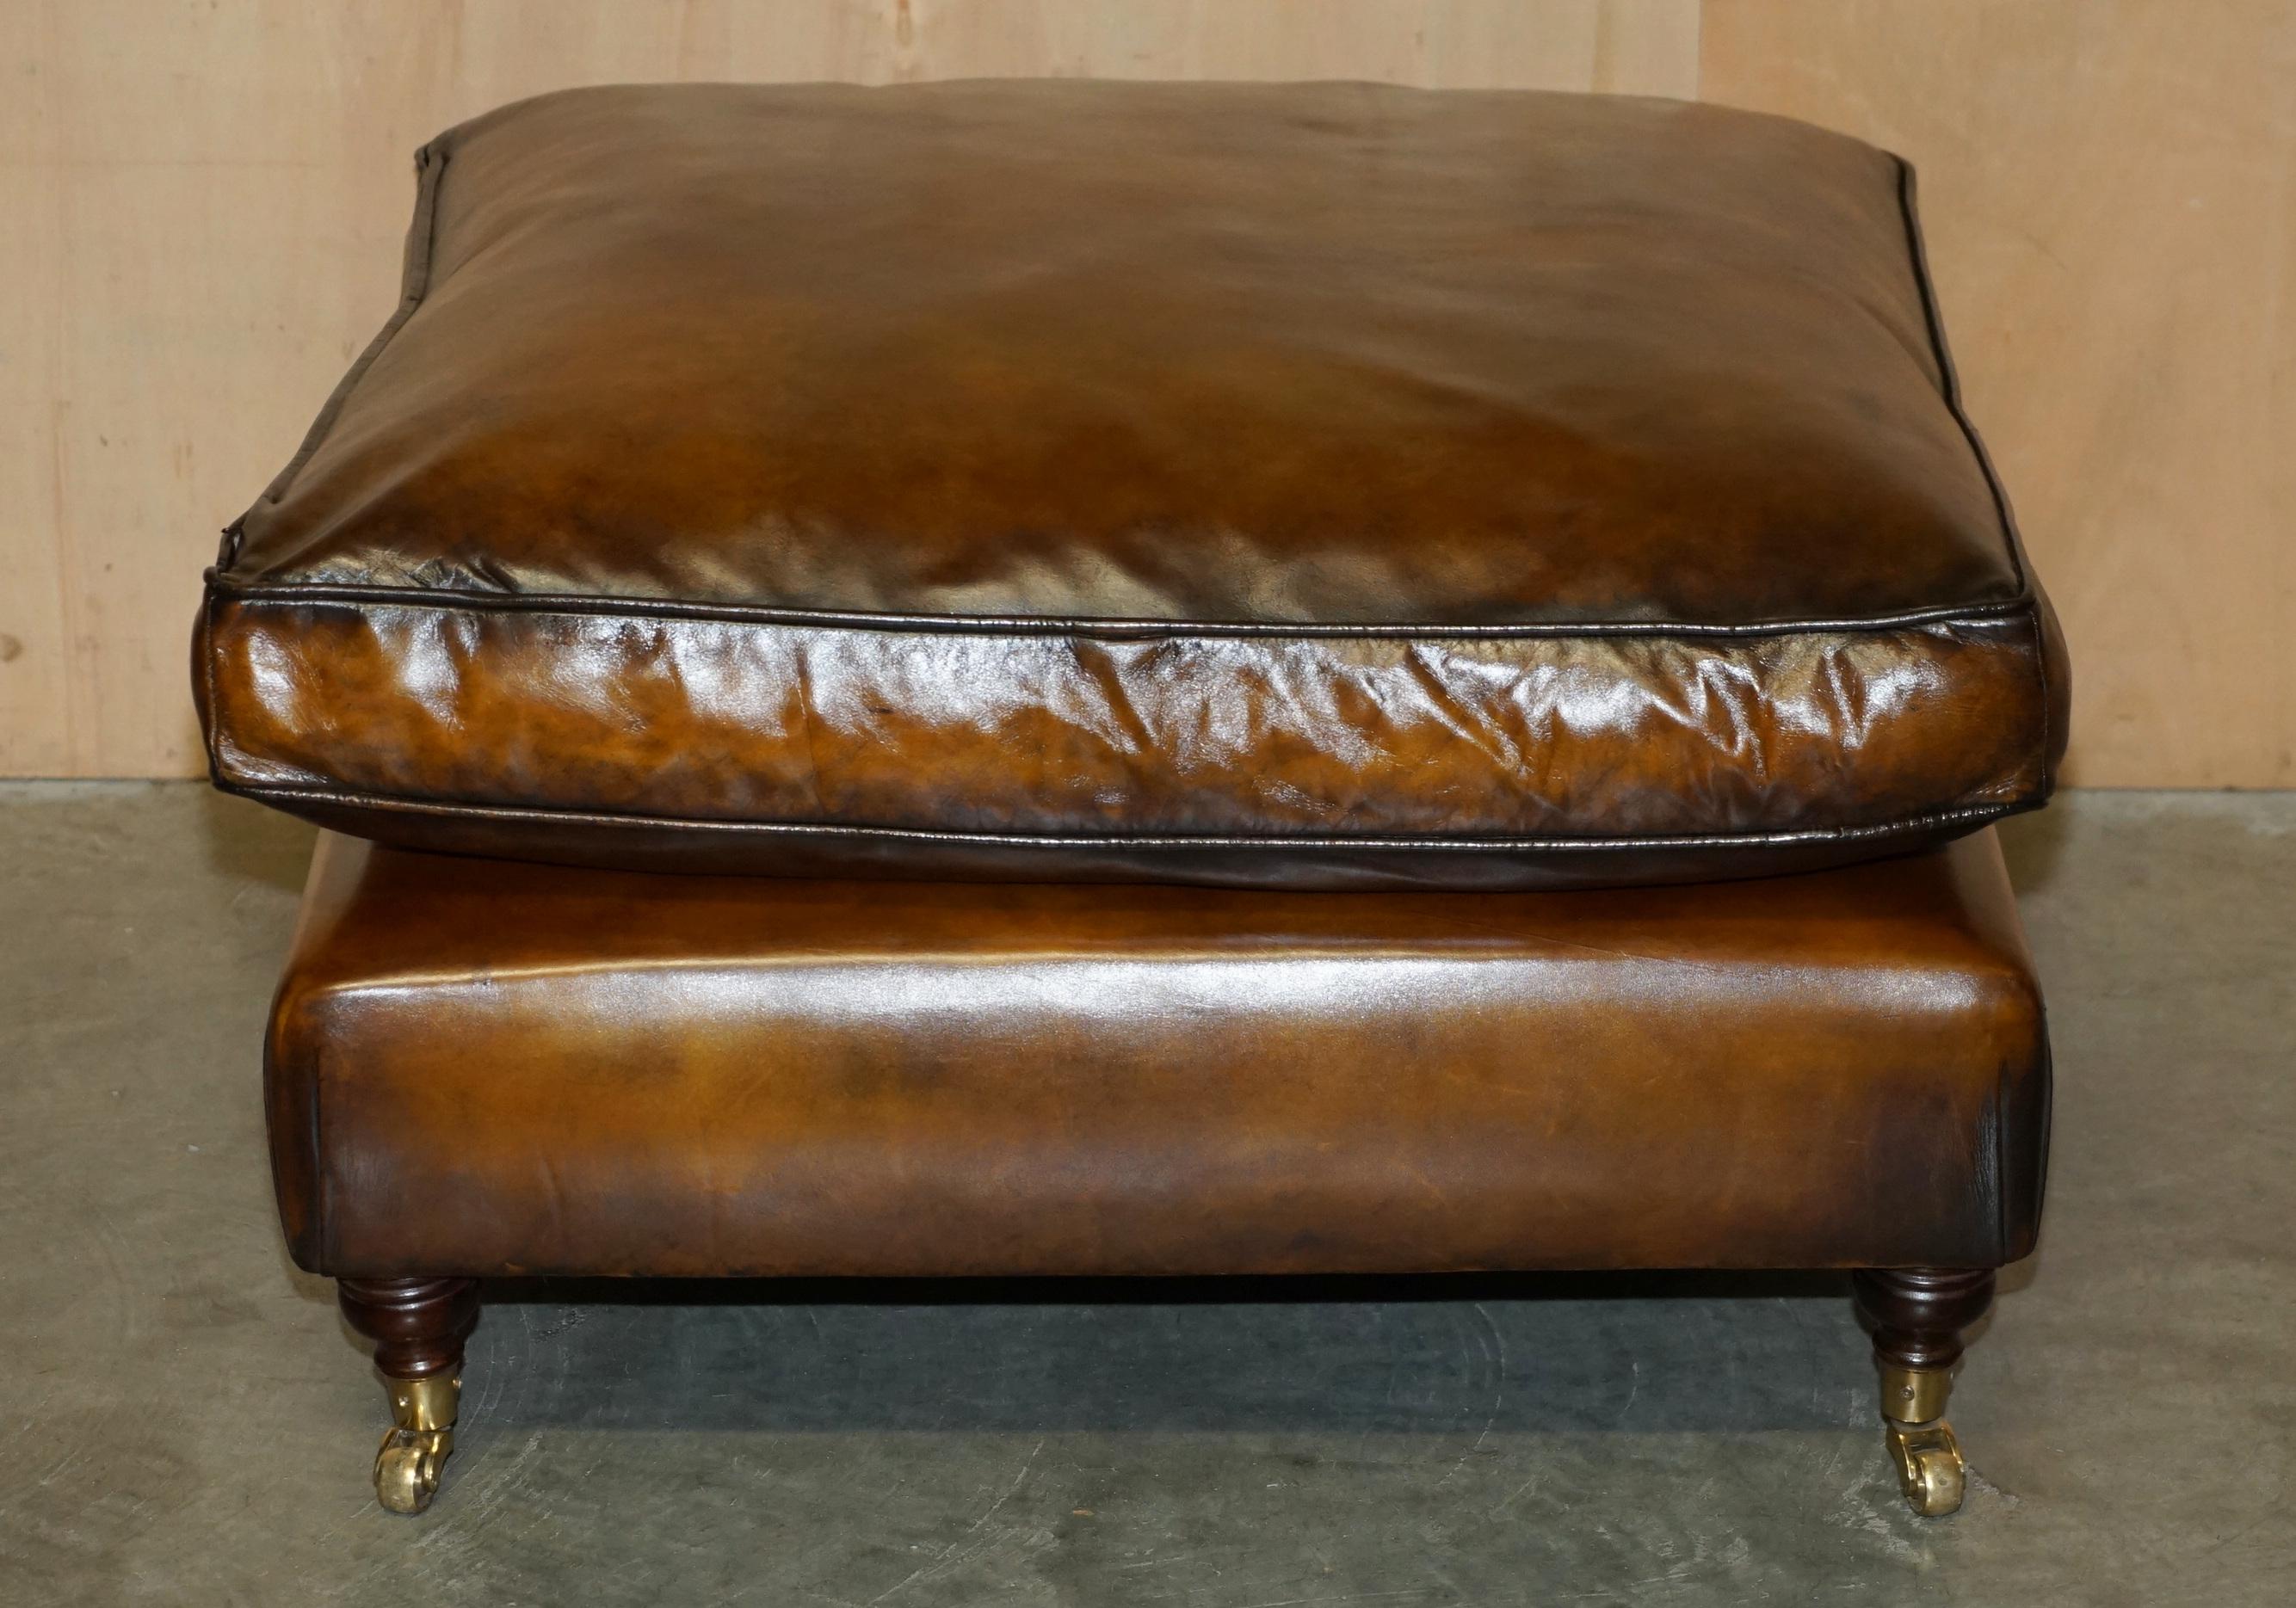 EXTRA LARGE FEATHER SEATHER SEAT RESTORED BROWN LEATHER OTTOMAN FOOTSTOOL PART OF SUiTE im Angebot 2